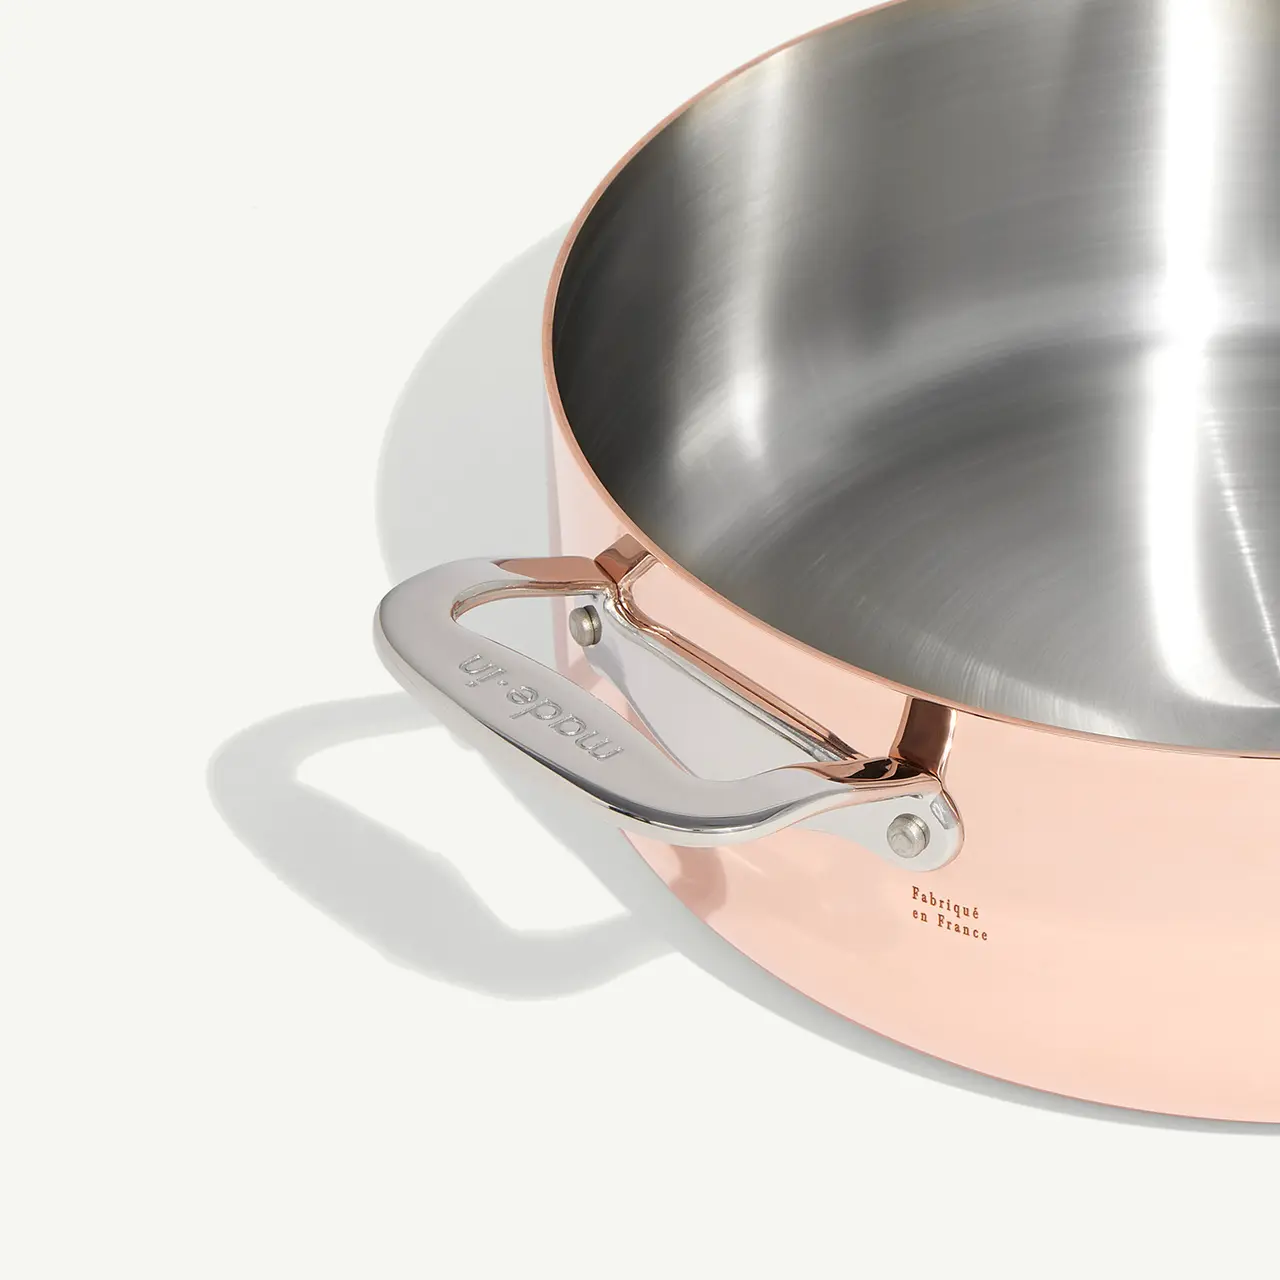 A stainless steel frying pan with a copper exterior and a detailed handle sits on a white surface, reflecting a soft light.